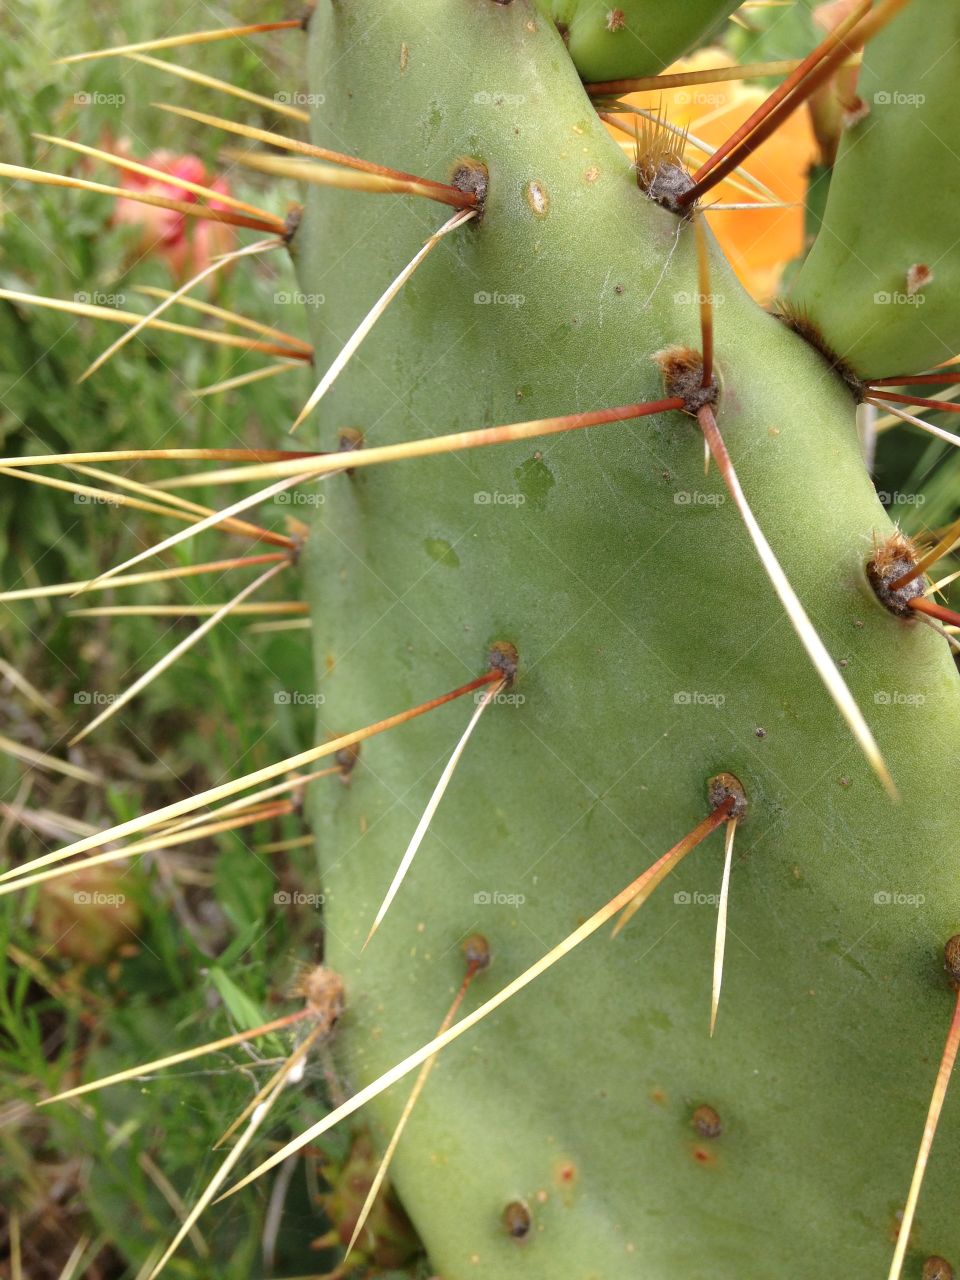 A little thorny . Prickly pear cactus thorns close up